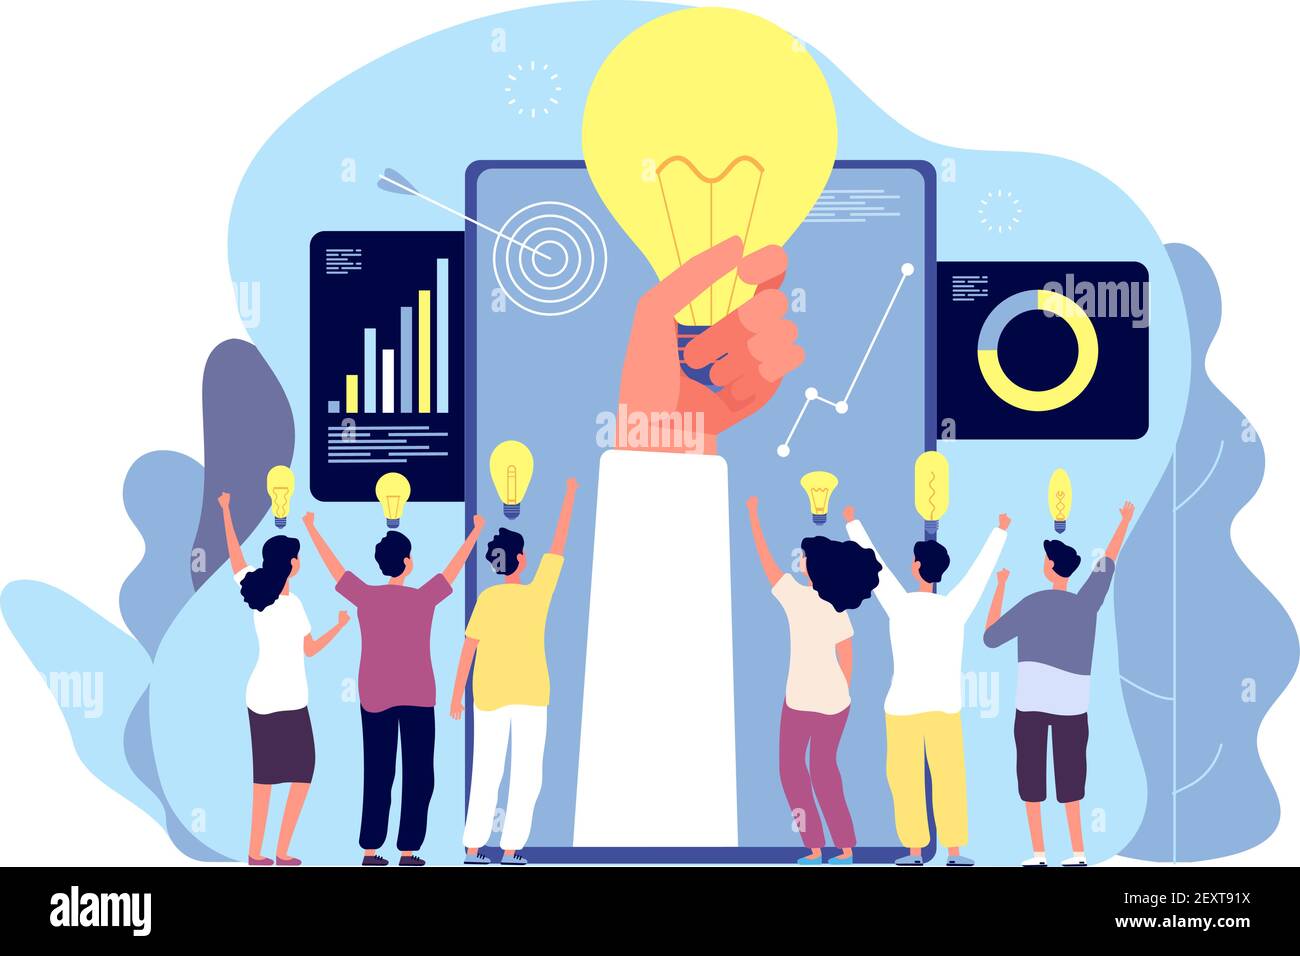 People with creative idea. Brainstorming with team and light bulbs, businessmen search solution. Innovation, leadership vector concept. Illustration idea leadership, people team success Stock Vector